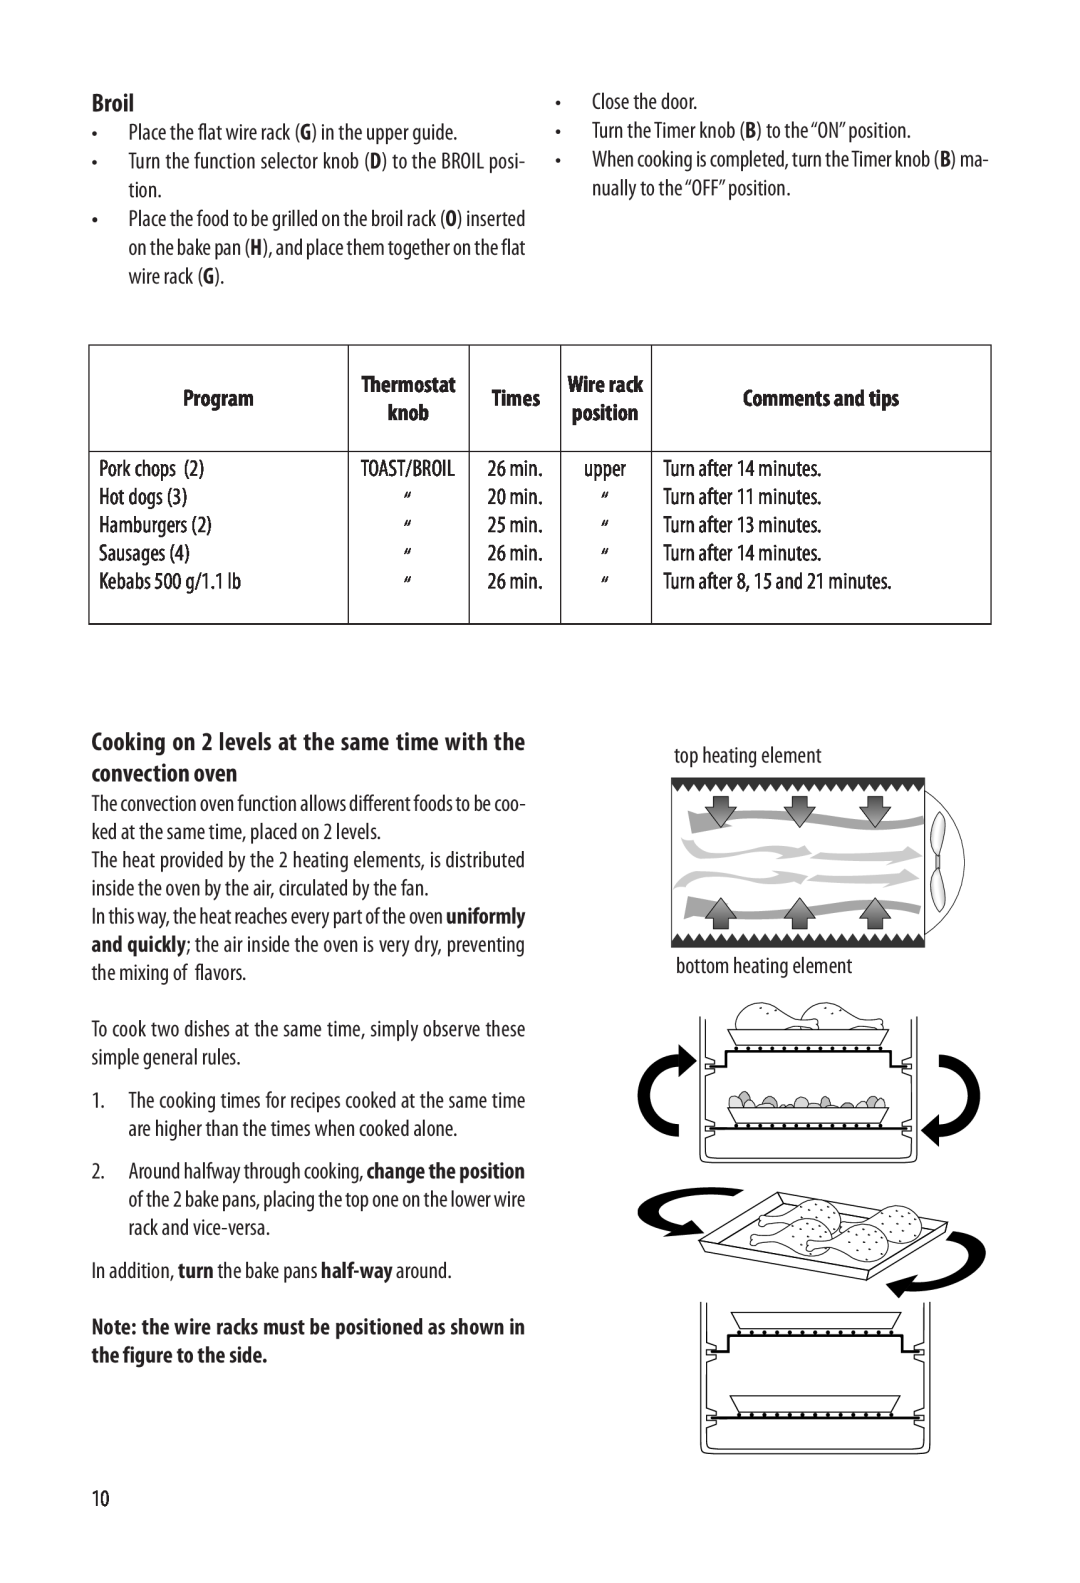 DeLonghi EO1270 1B specifications Broil, Times, Program, Comments and tips 